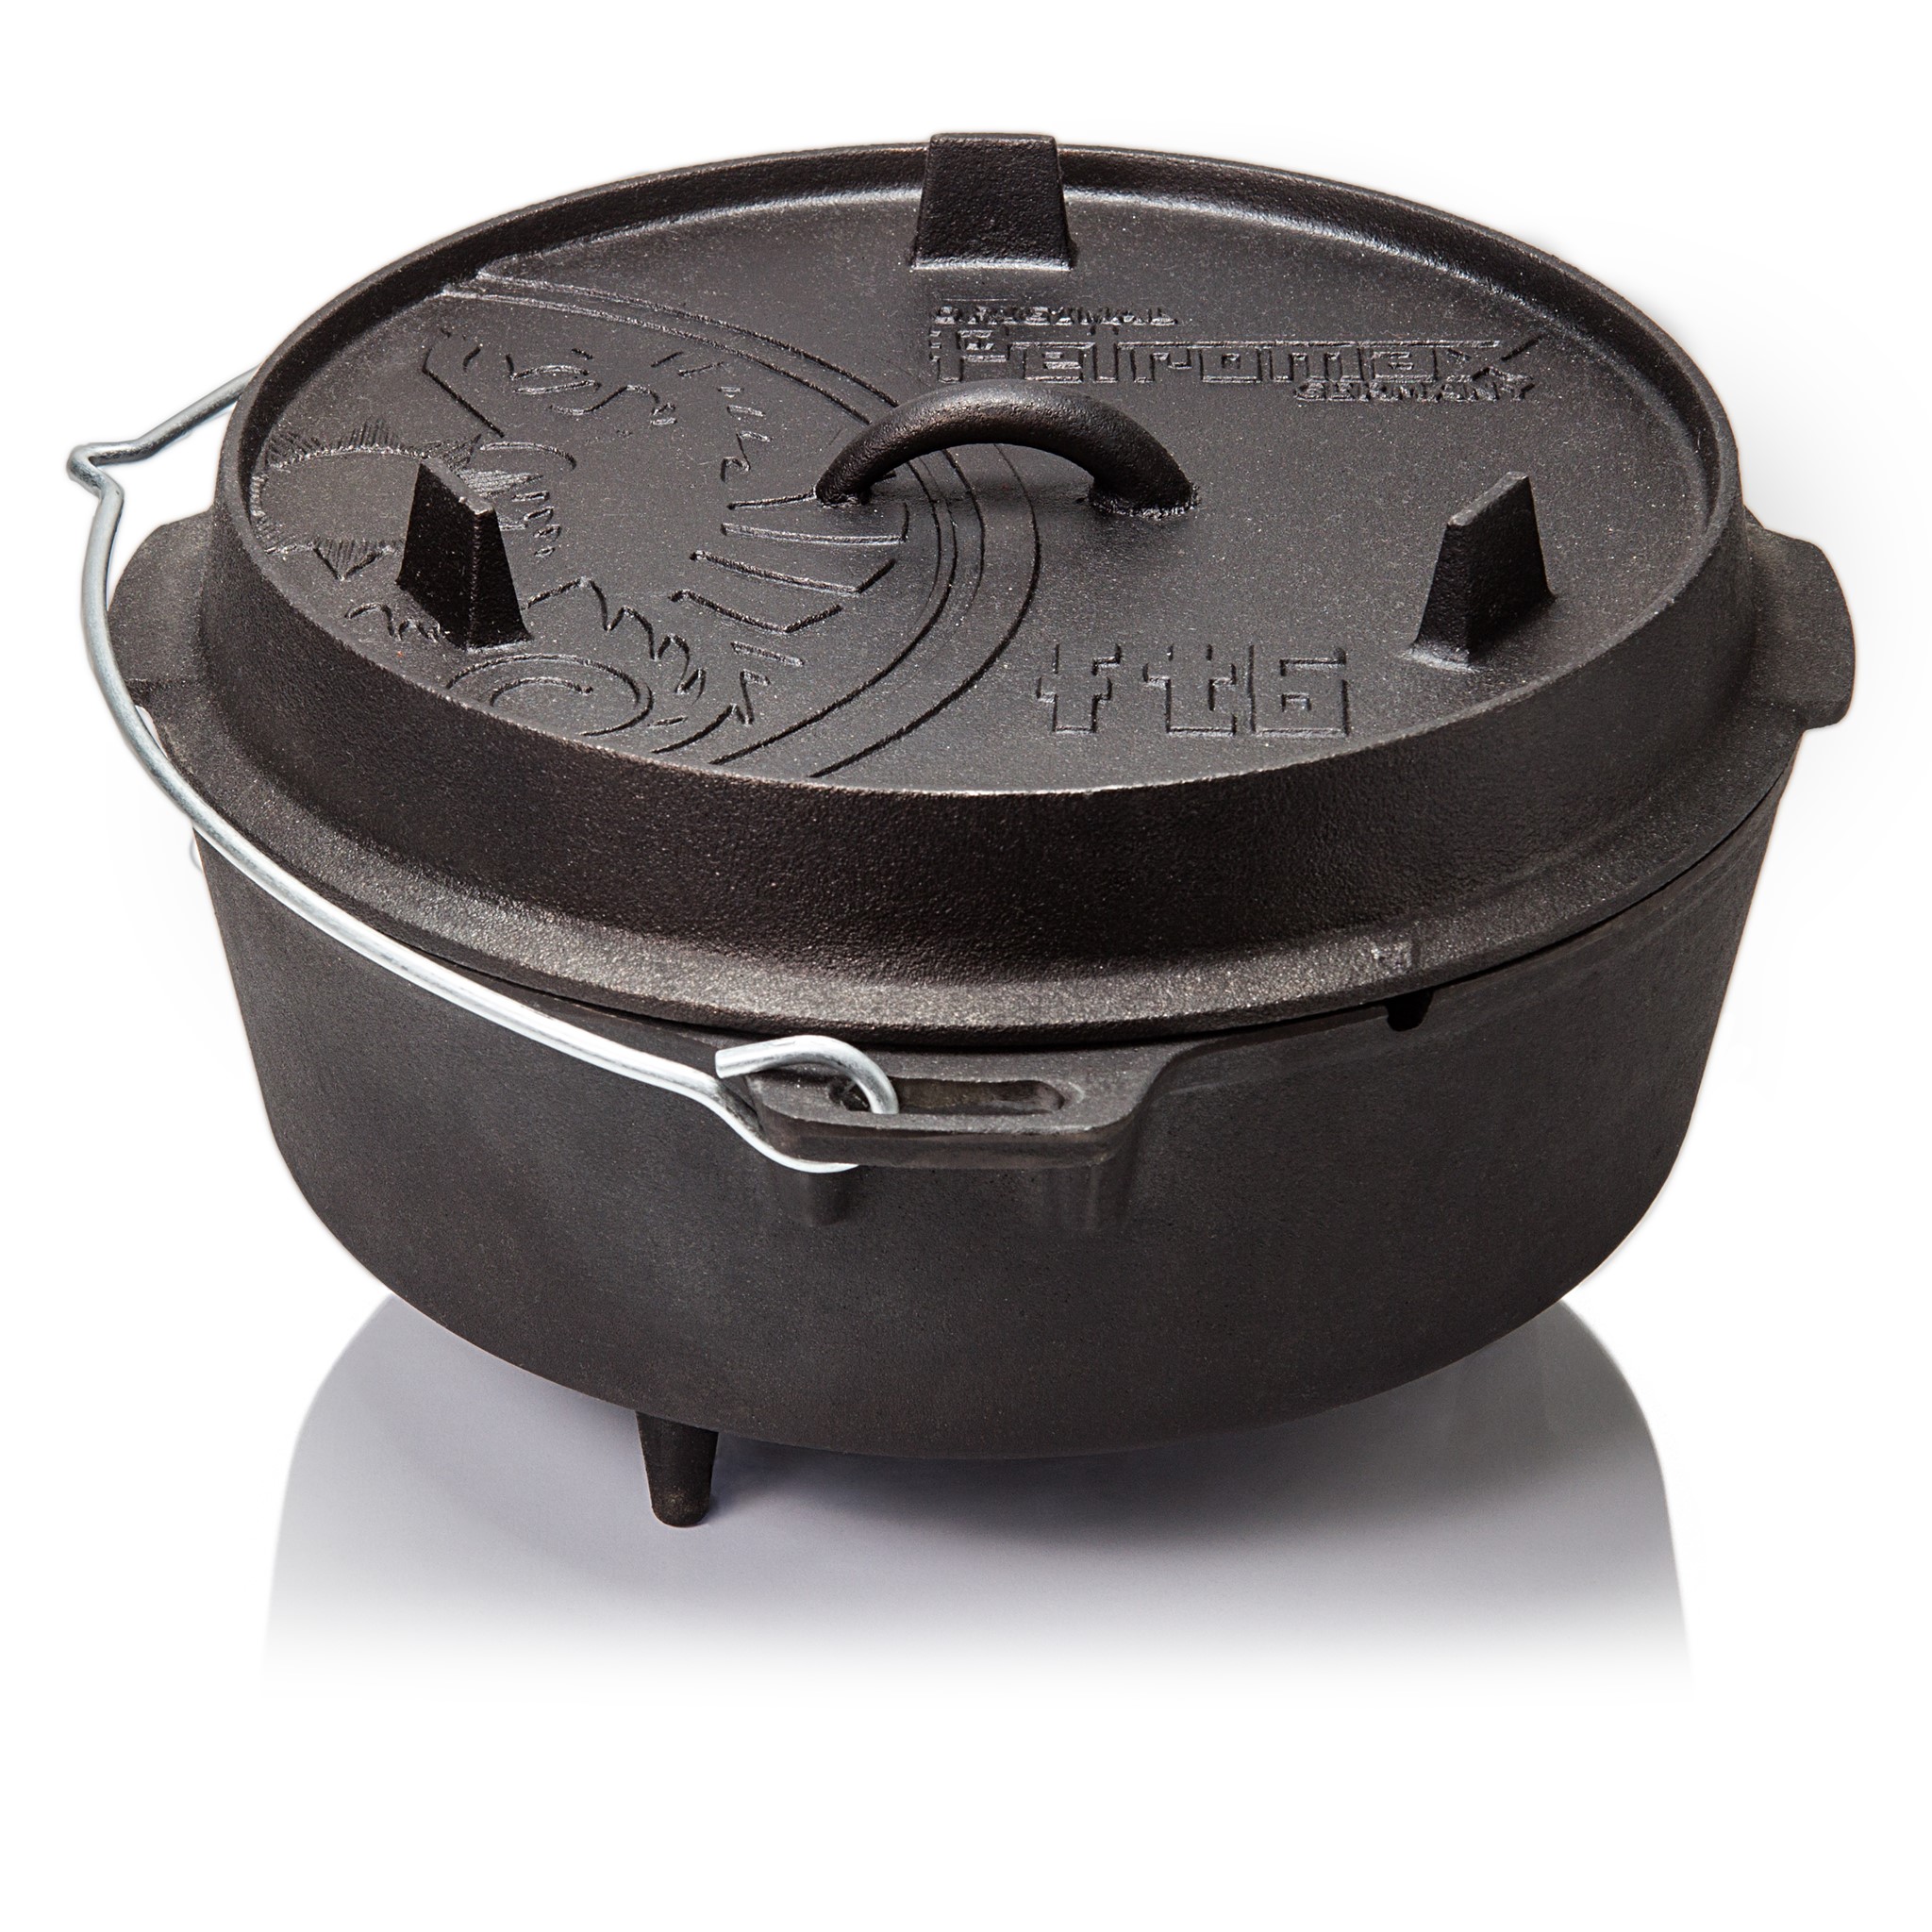 Picture of Petromax - Dutch Oven FT6 5.5 Liter (with Feet)